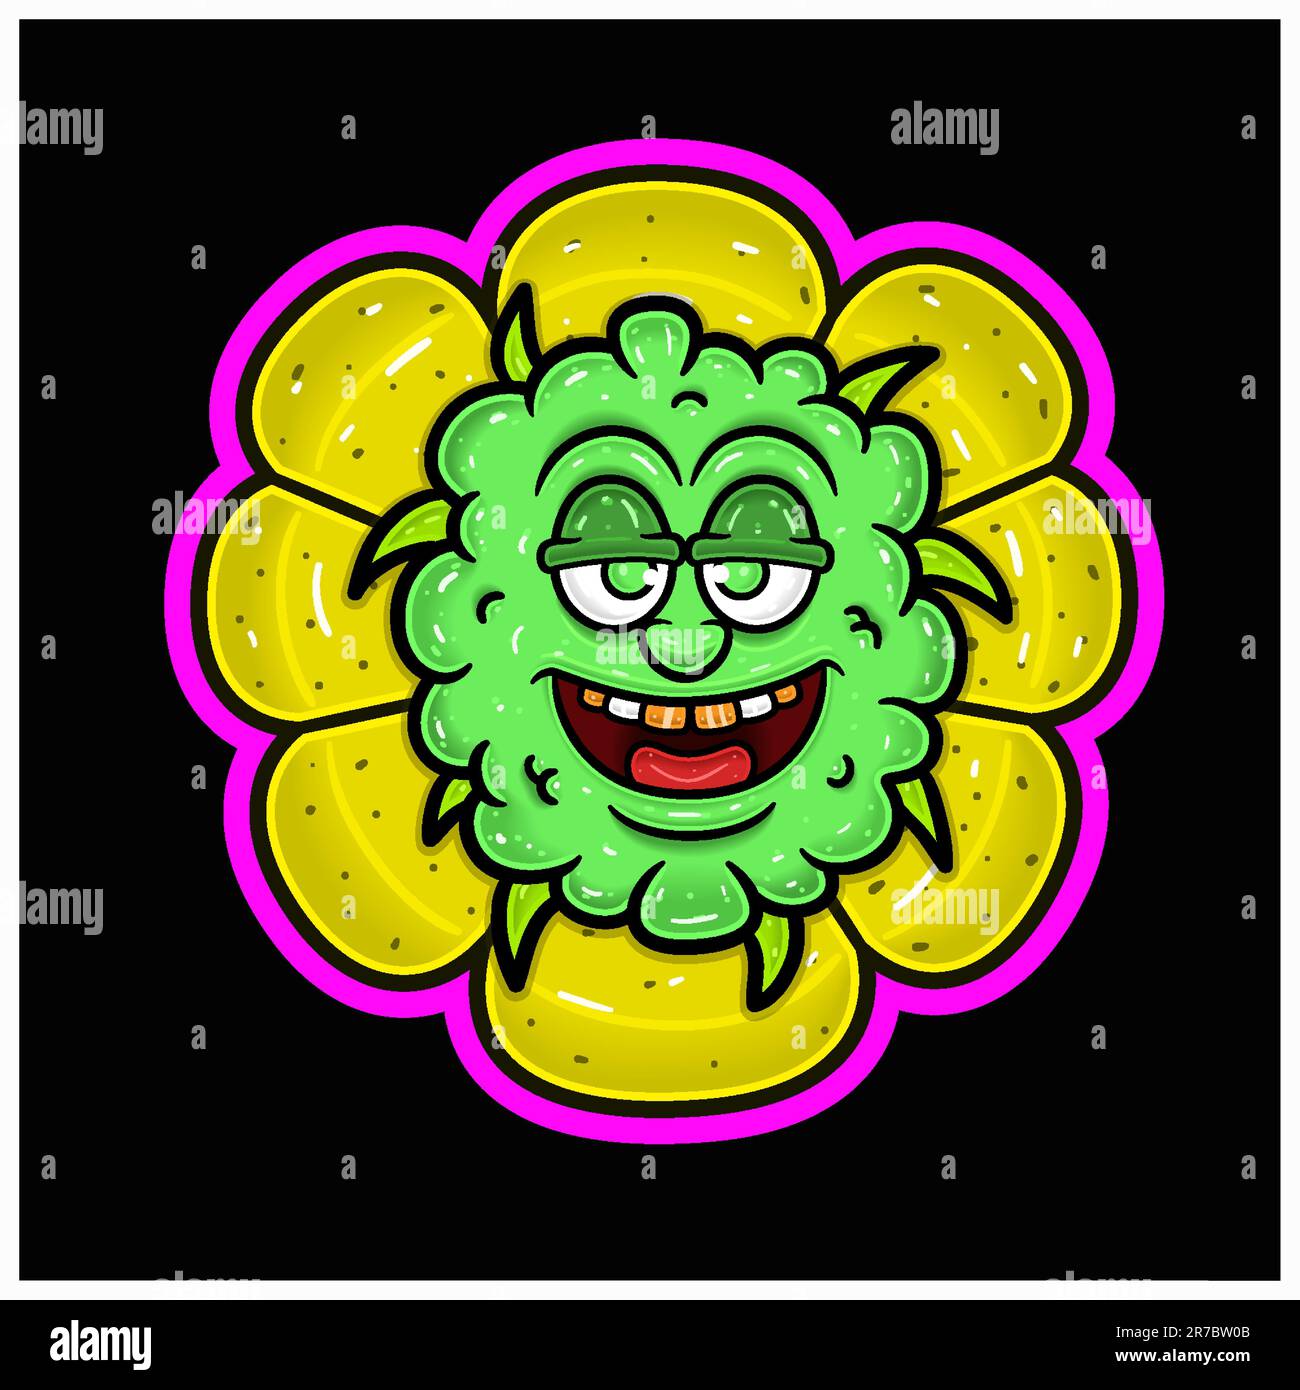 Cartoon Mascot of Weed Bud On Flower. Perfect For Label, Cover, Packaging, and Product Design. Vectors and Illustrations. Stock Vector